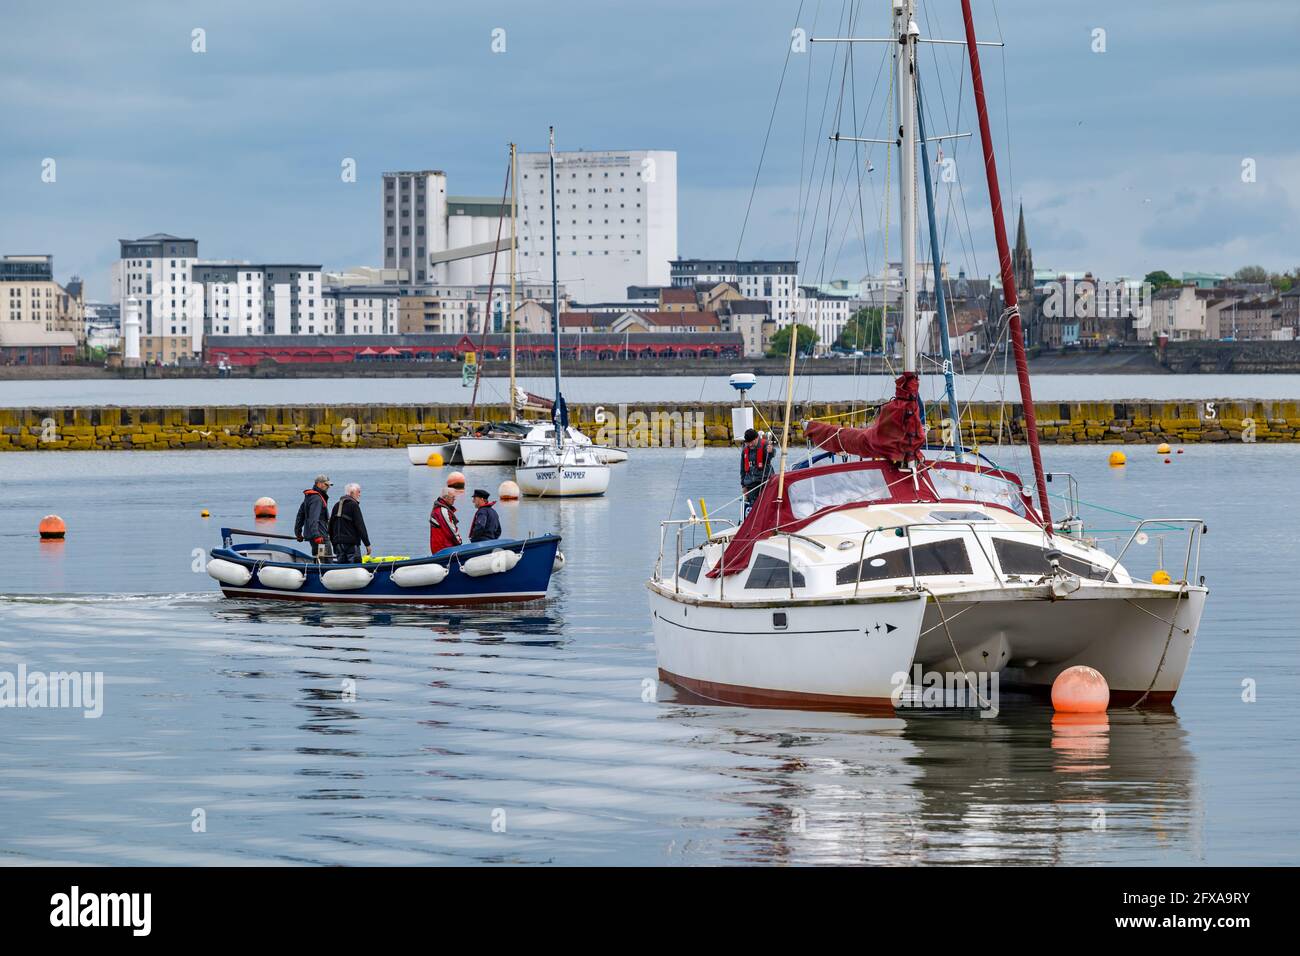 Edinburgh, Scotland, United Kingdom, 26th May 2021. Catamaran sailing boats moored in Granton harbour with Platinum Point apartment blocks in the distance Stock Photo